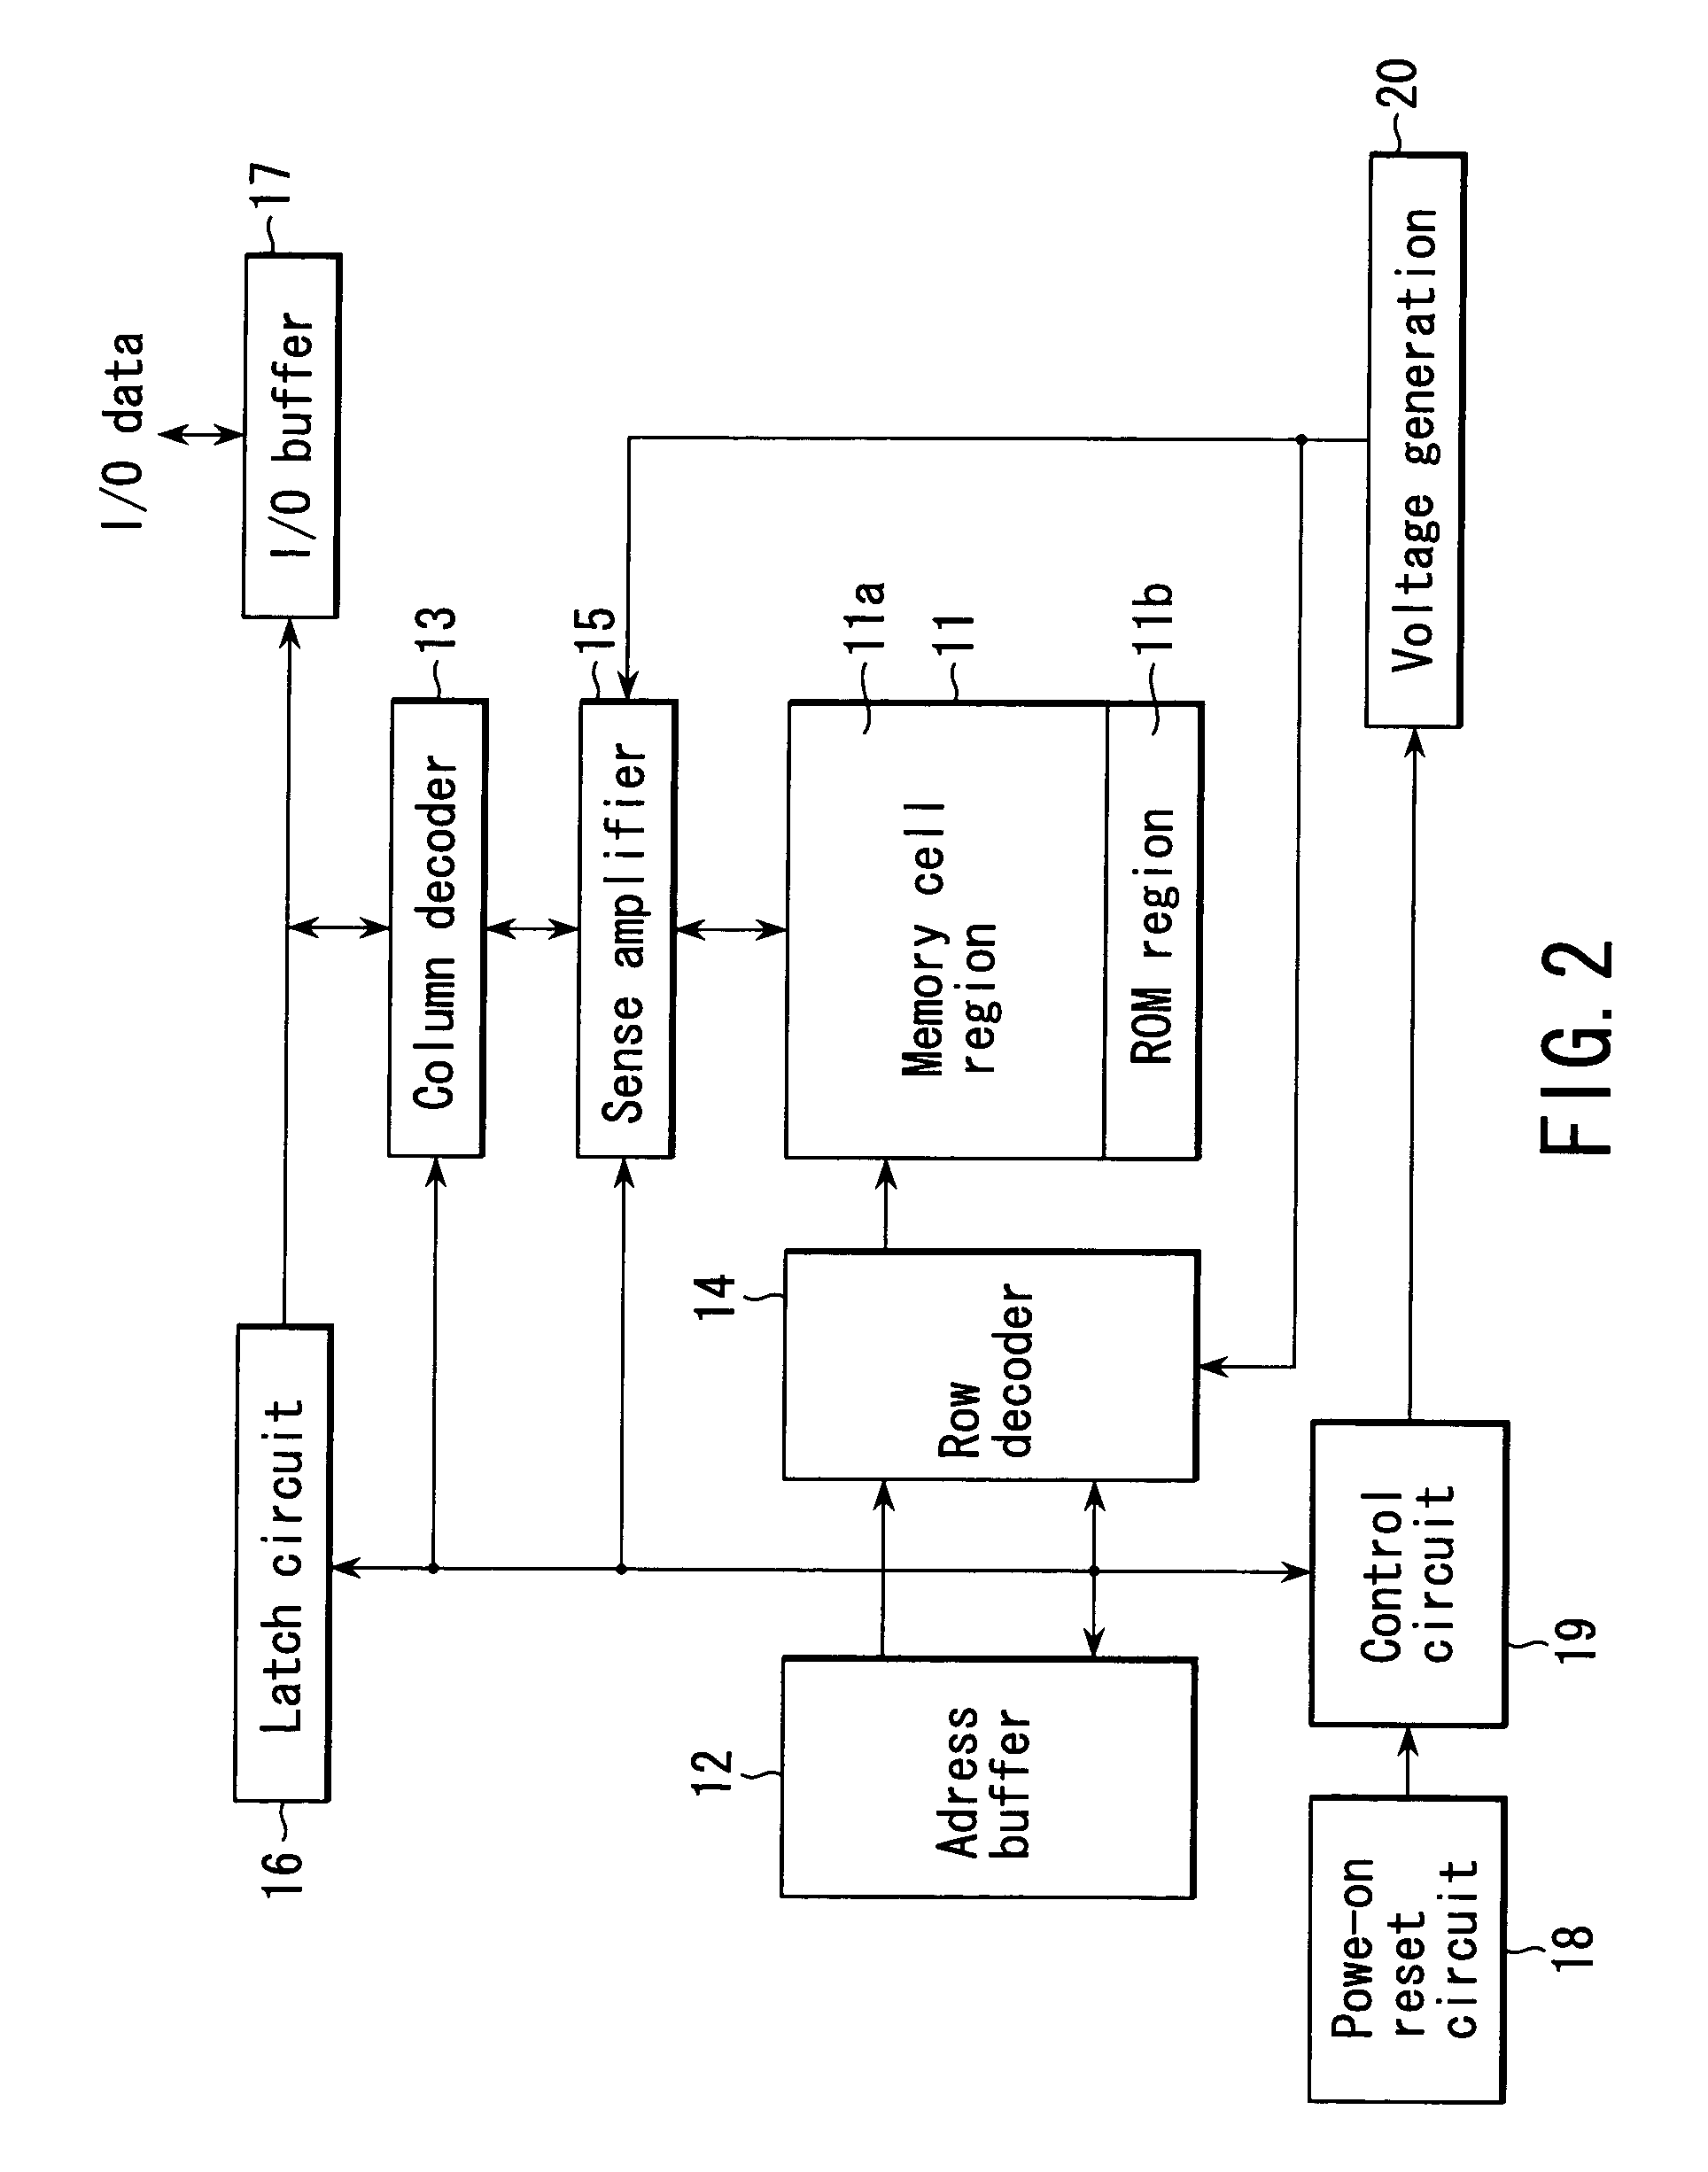 Non-volatile semiconductor storage device performing ROM read operation upon power-on